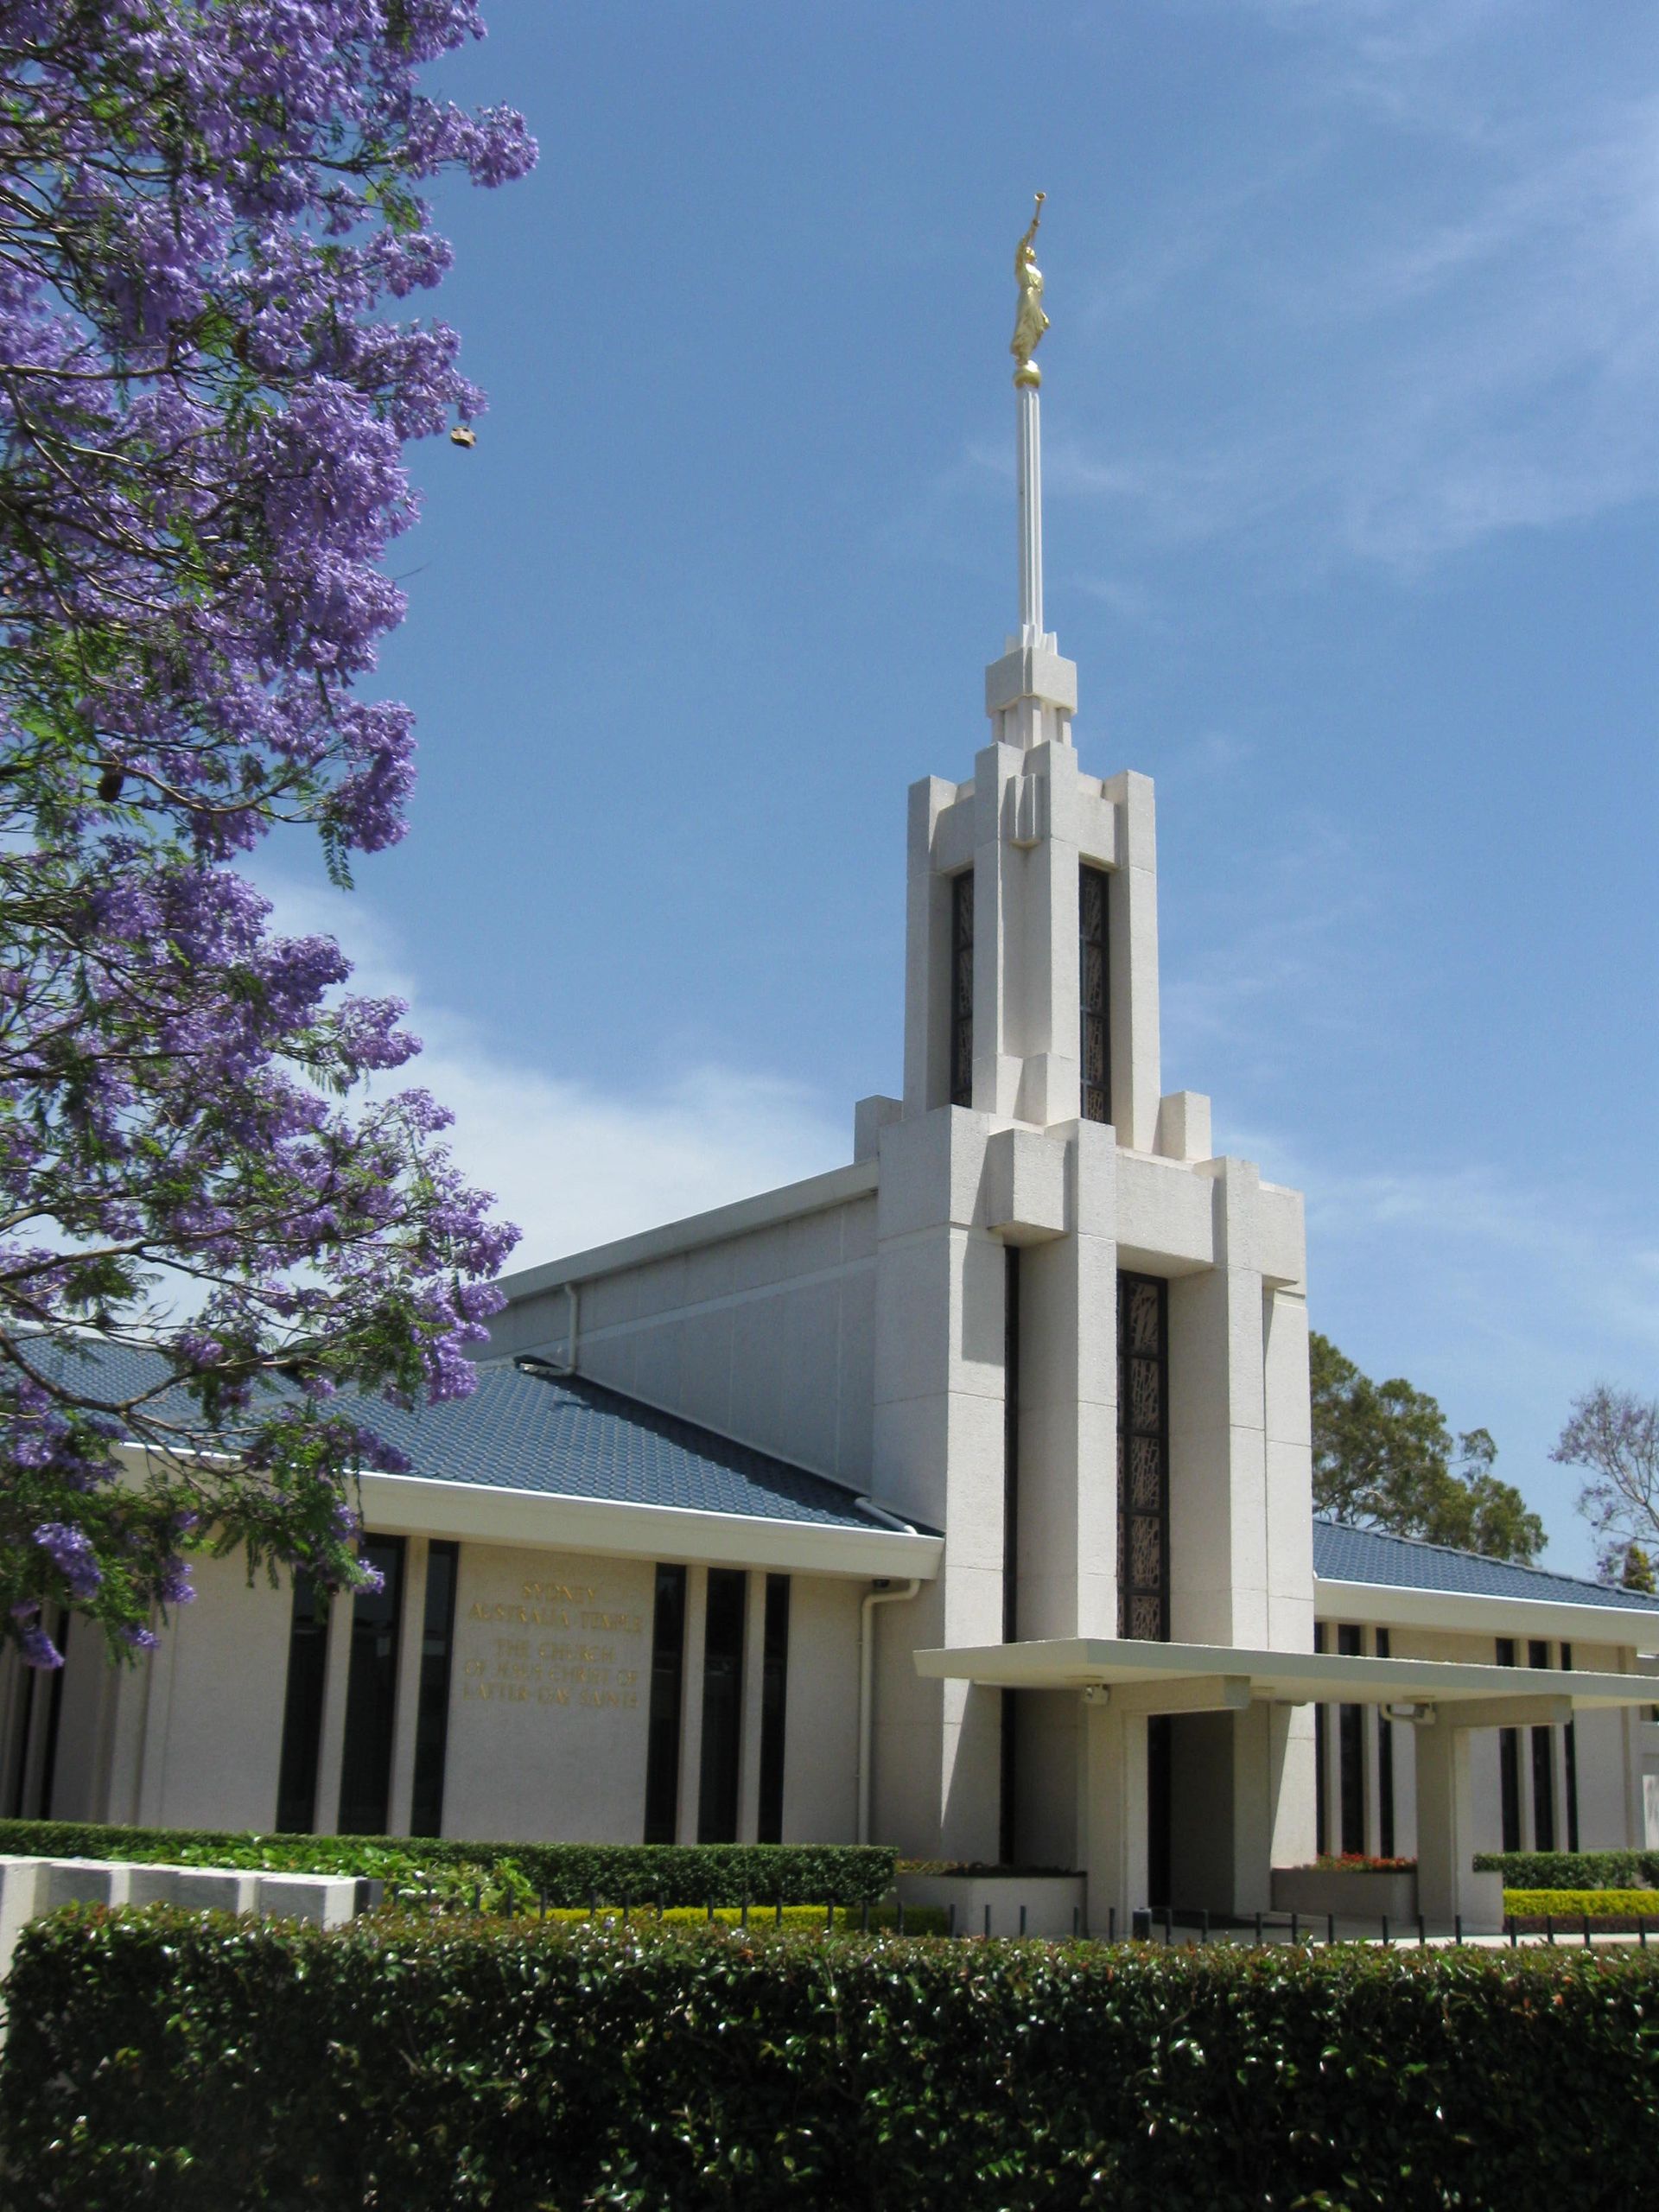 The Sydney Australia Temple, including the entrance and scenery.